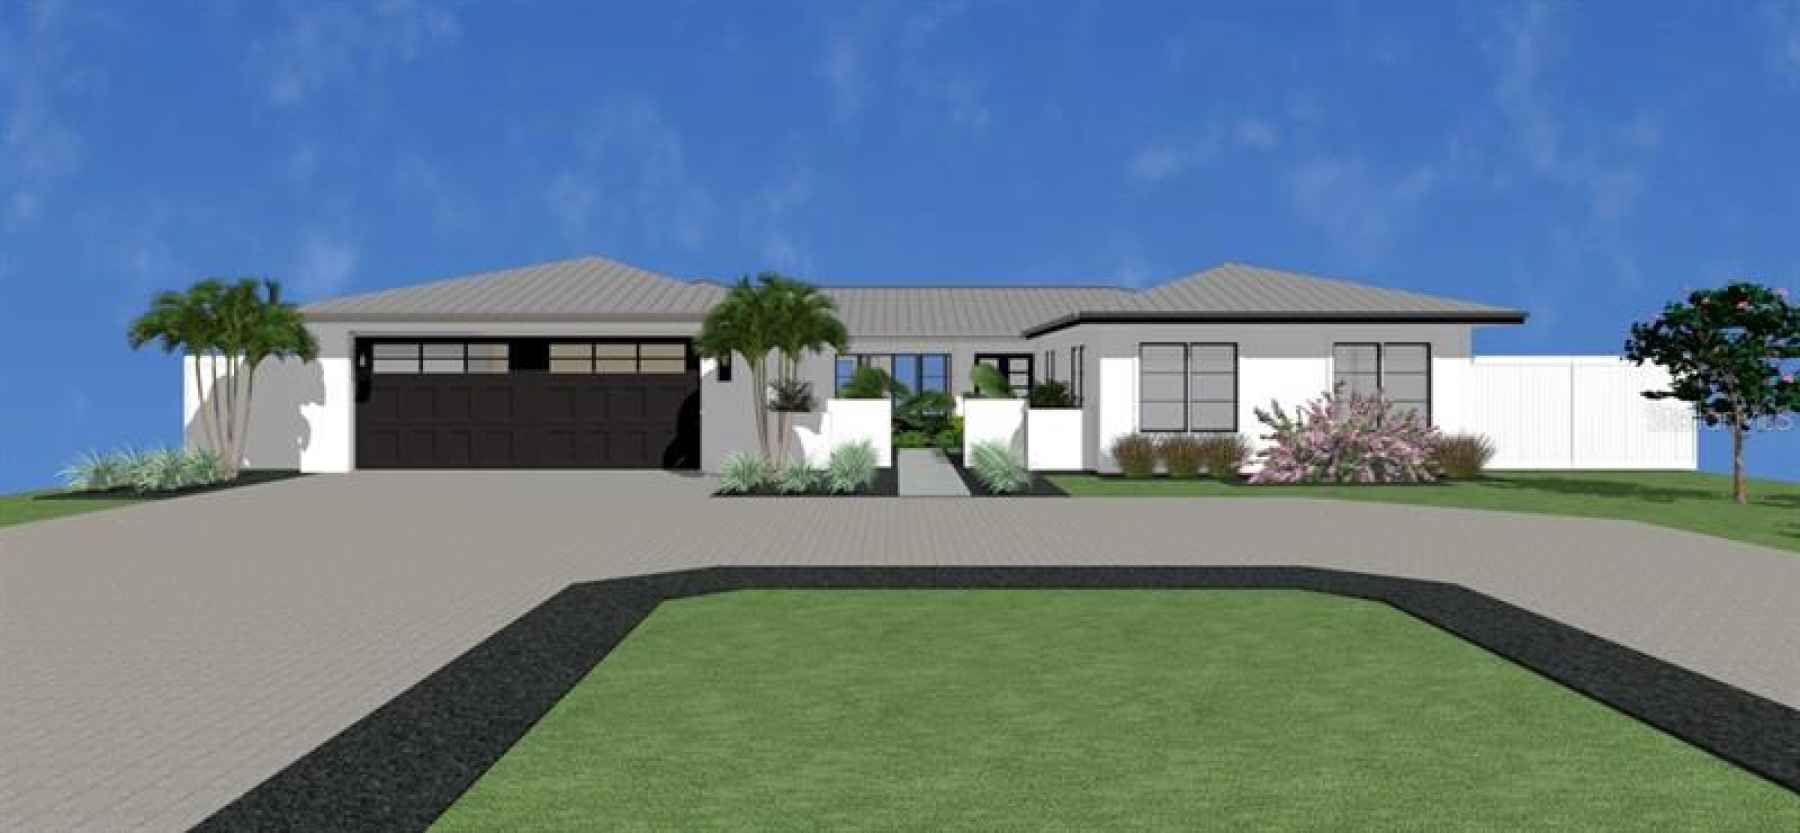 Front Landscape and Driveway Rendering. Buyers will customize to their taste and needs.